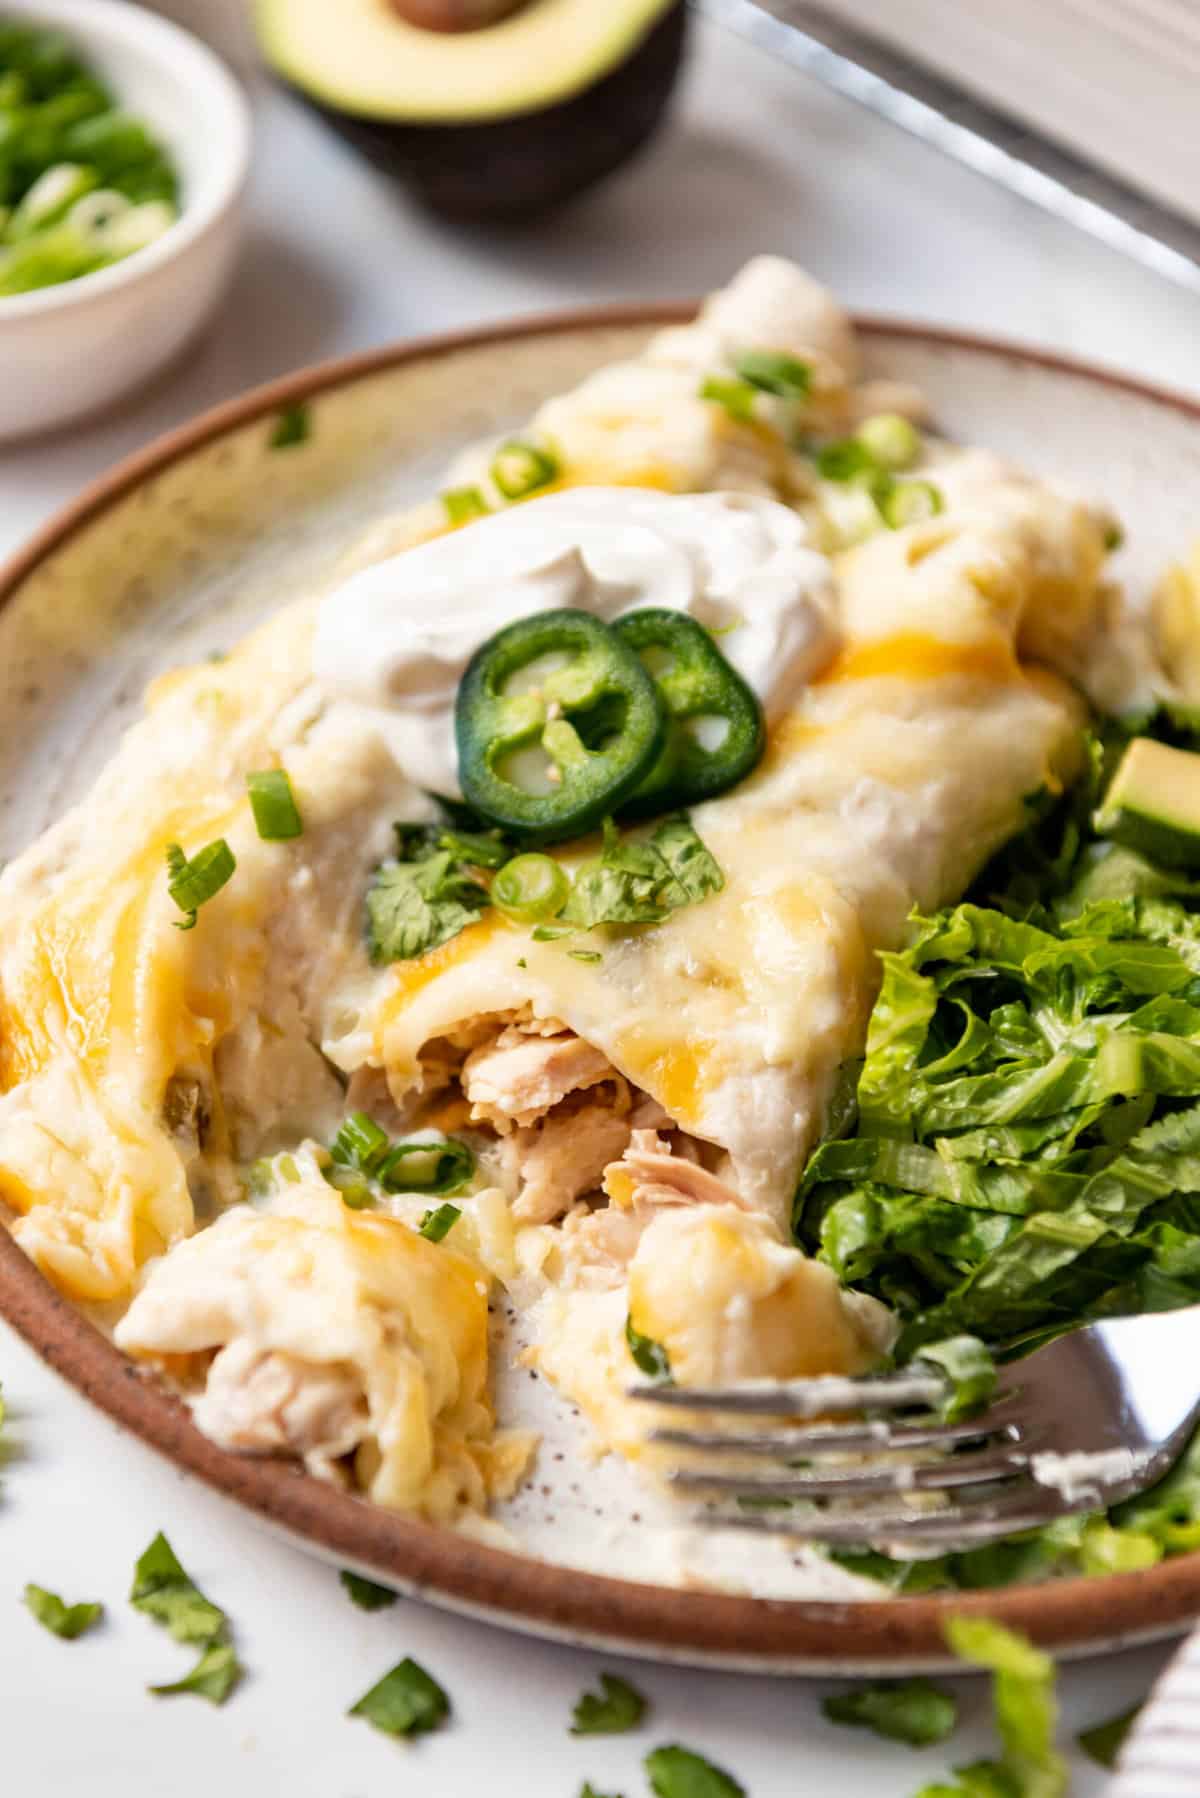 Two white chicken enchiladas on a plate with a bite taken out of one of them.